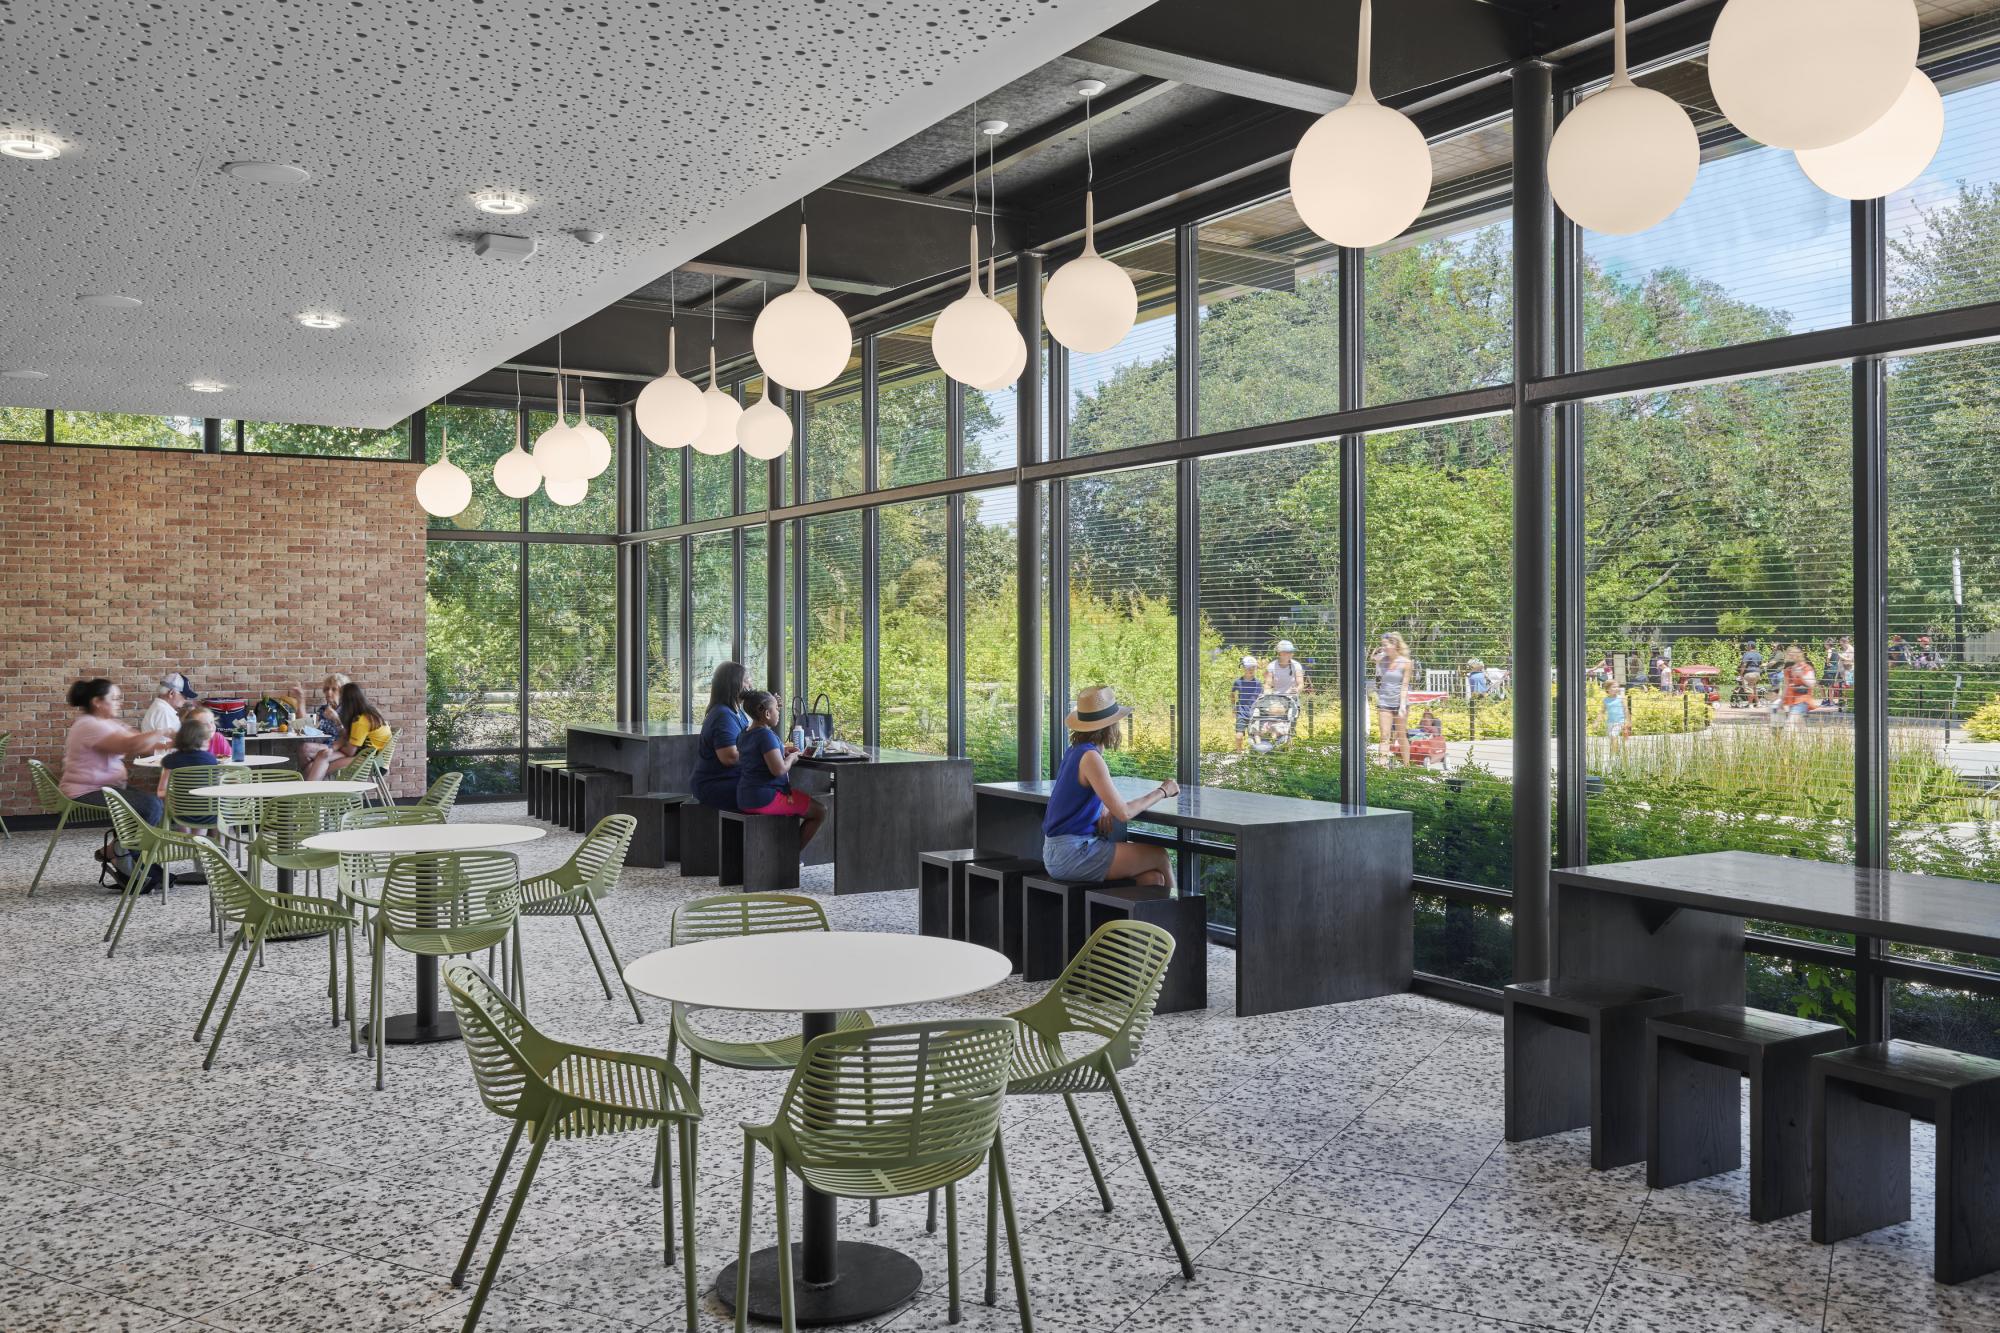 A redesigned front entrance, Cypress Circle Cafe sited along the Zoo’s new multi-species Texas Wetlands habitat creates a new iconic identity and positions the zoo as leaders in conservation and education. Green Restaurant Certified.